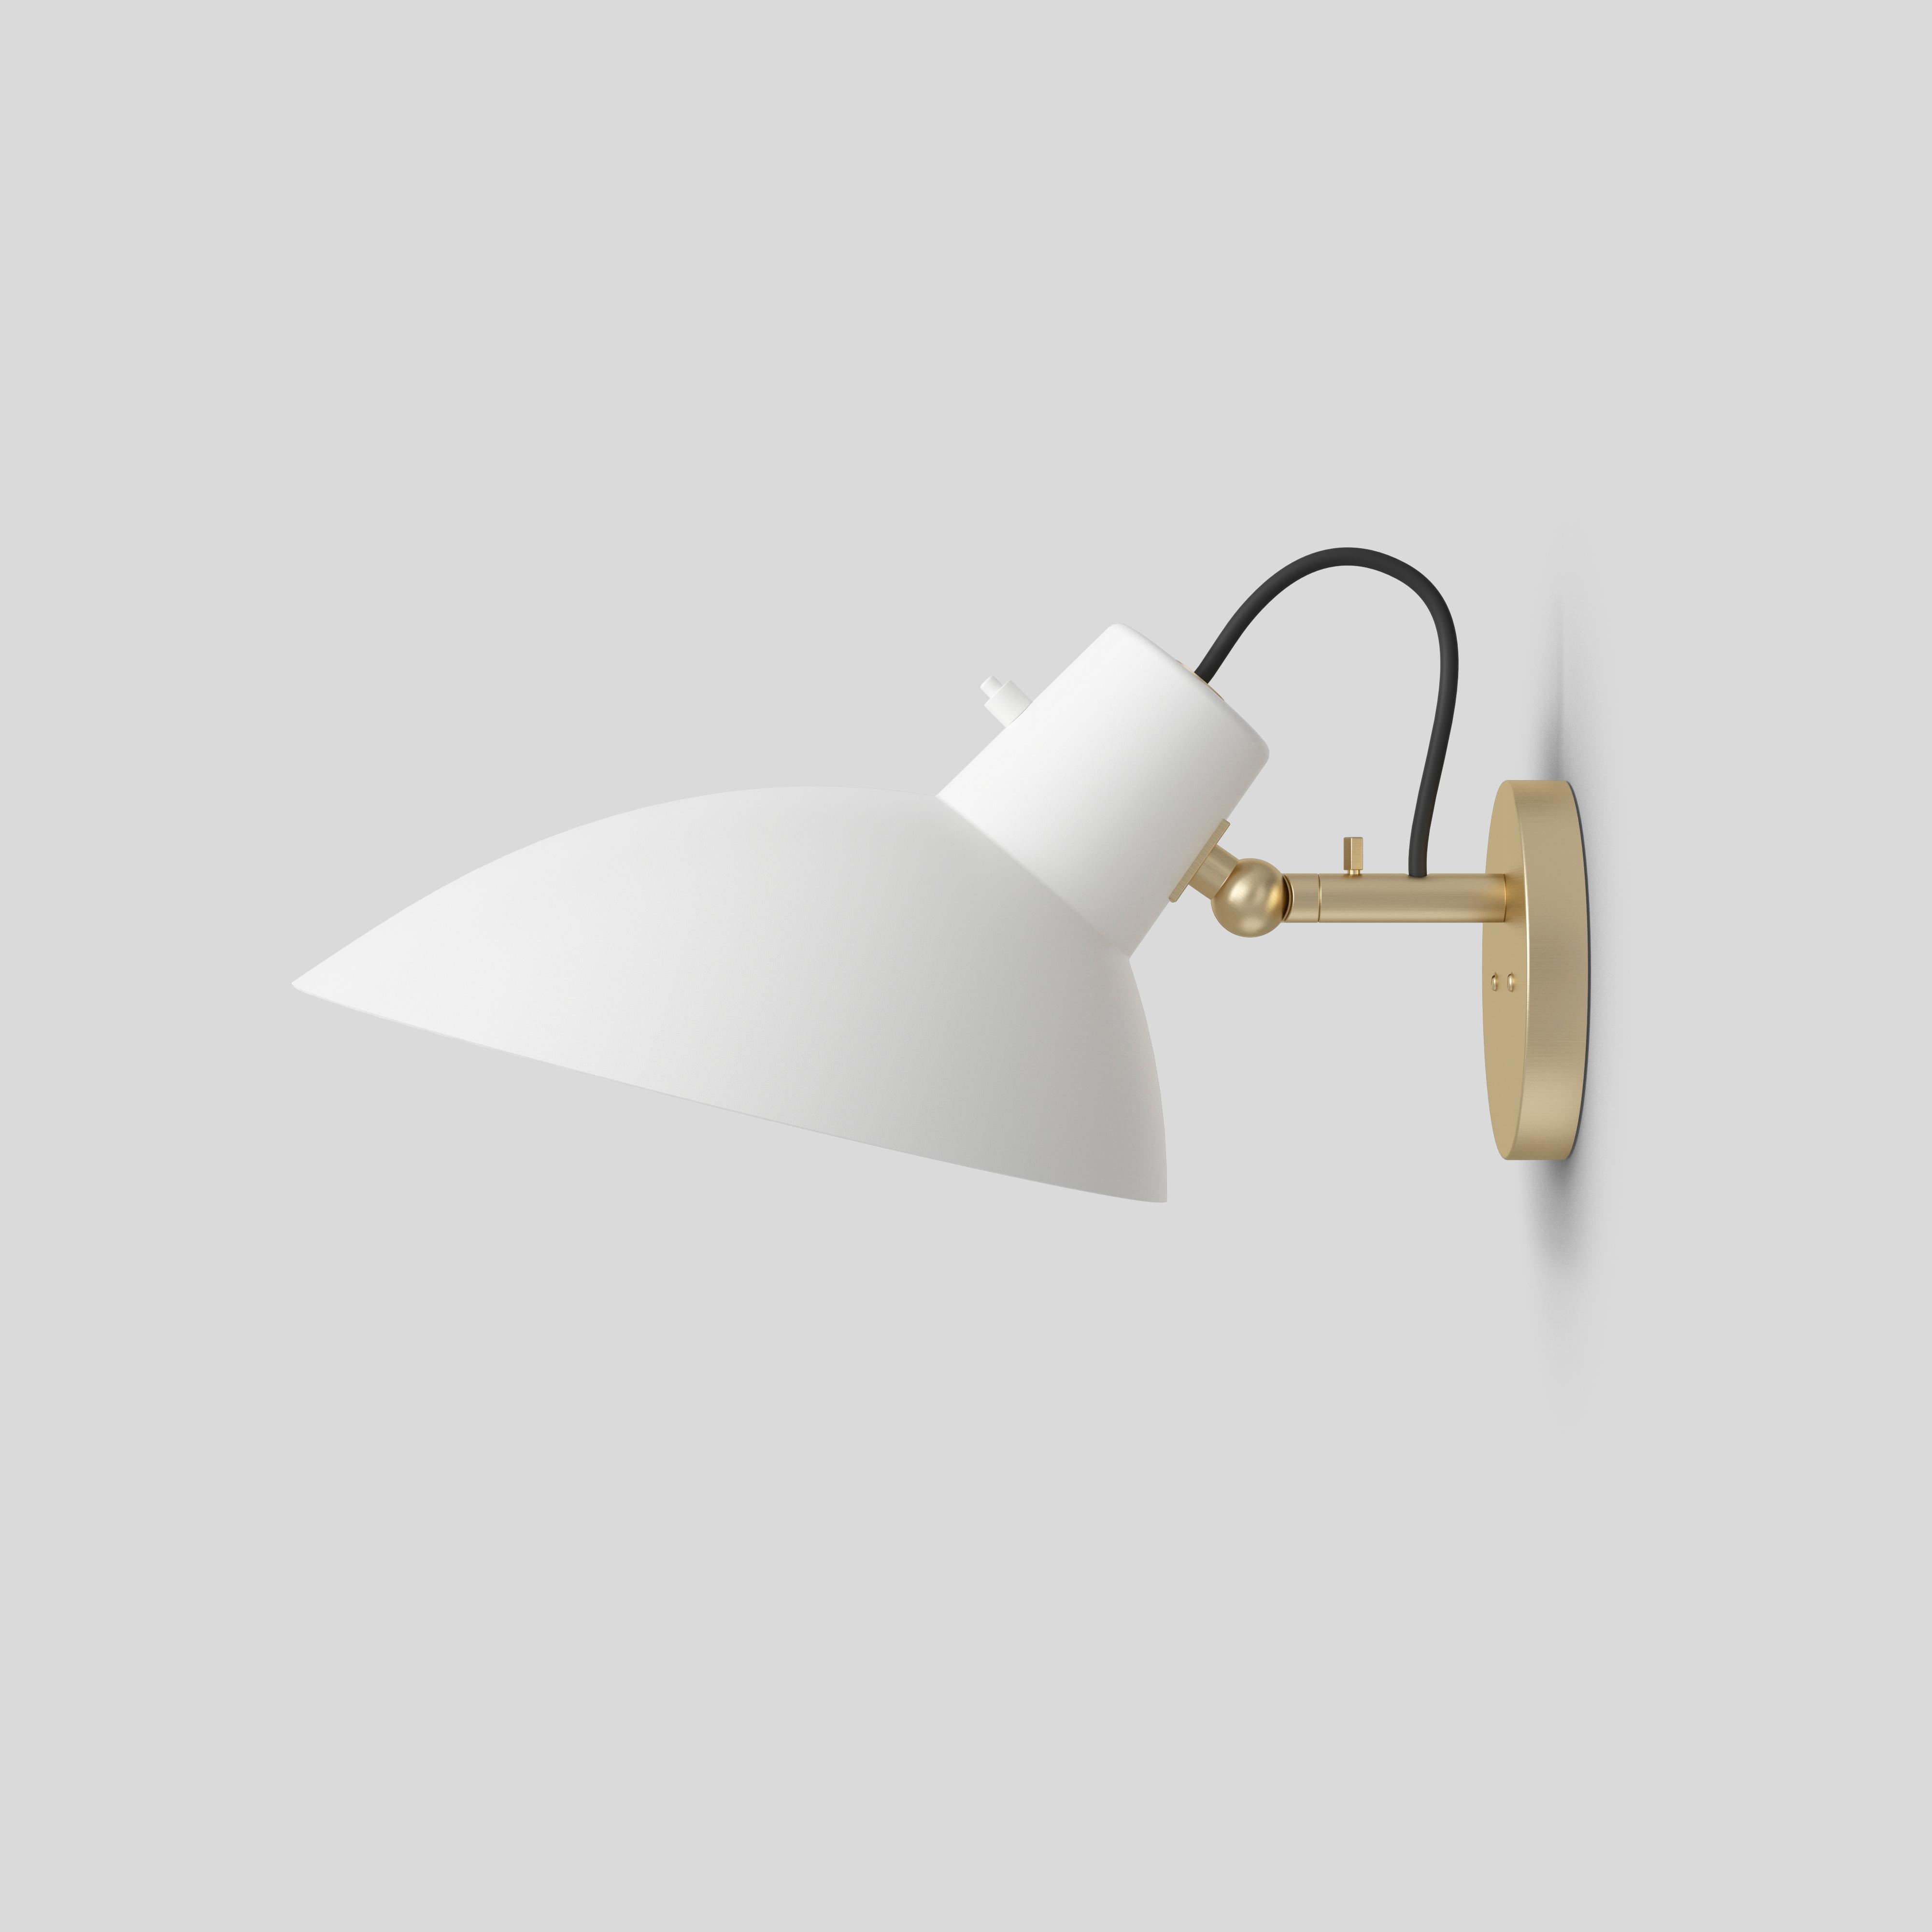 VV Cinquanta wall.
Design by Vittoriano Viganò.
This version is with white lacquered reflector and brass mount, Including Switch.

The VV Cinquanta features an elegant and versatile possible direct light source that can swivel and tilt. The Wall